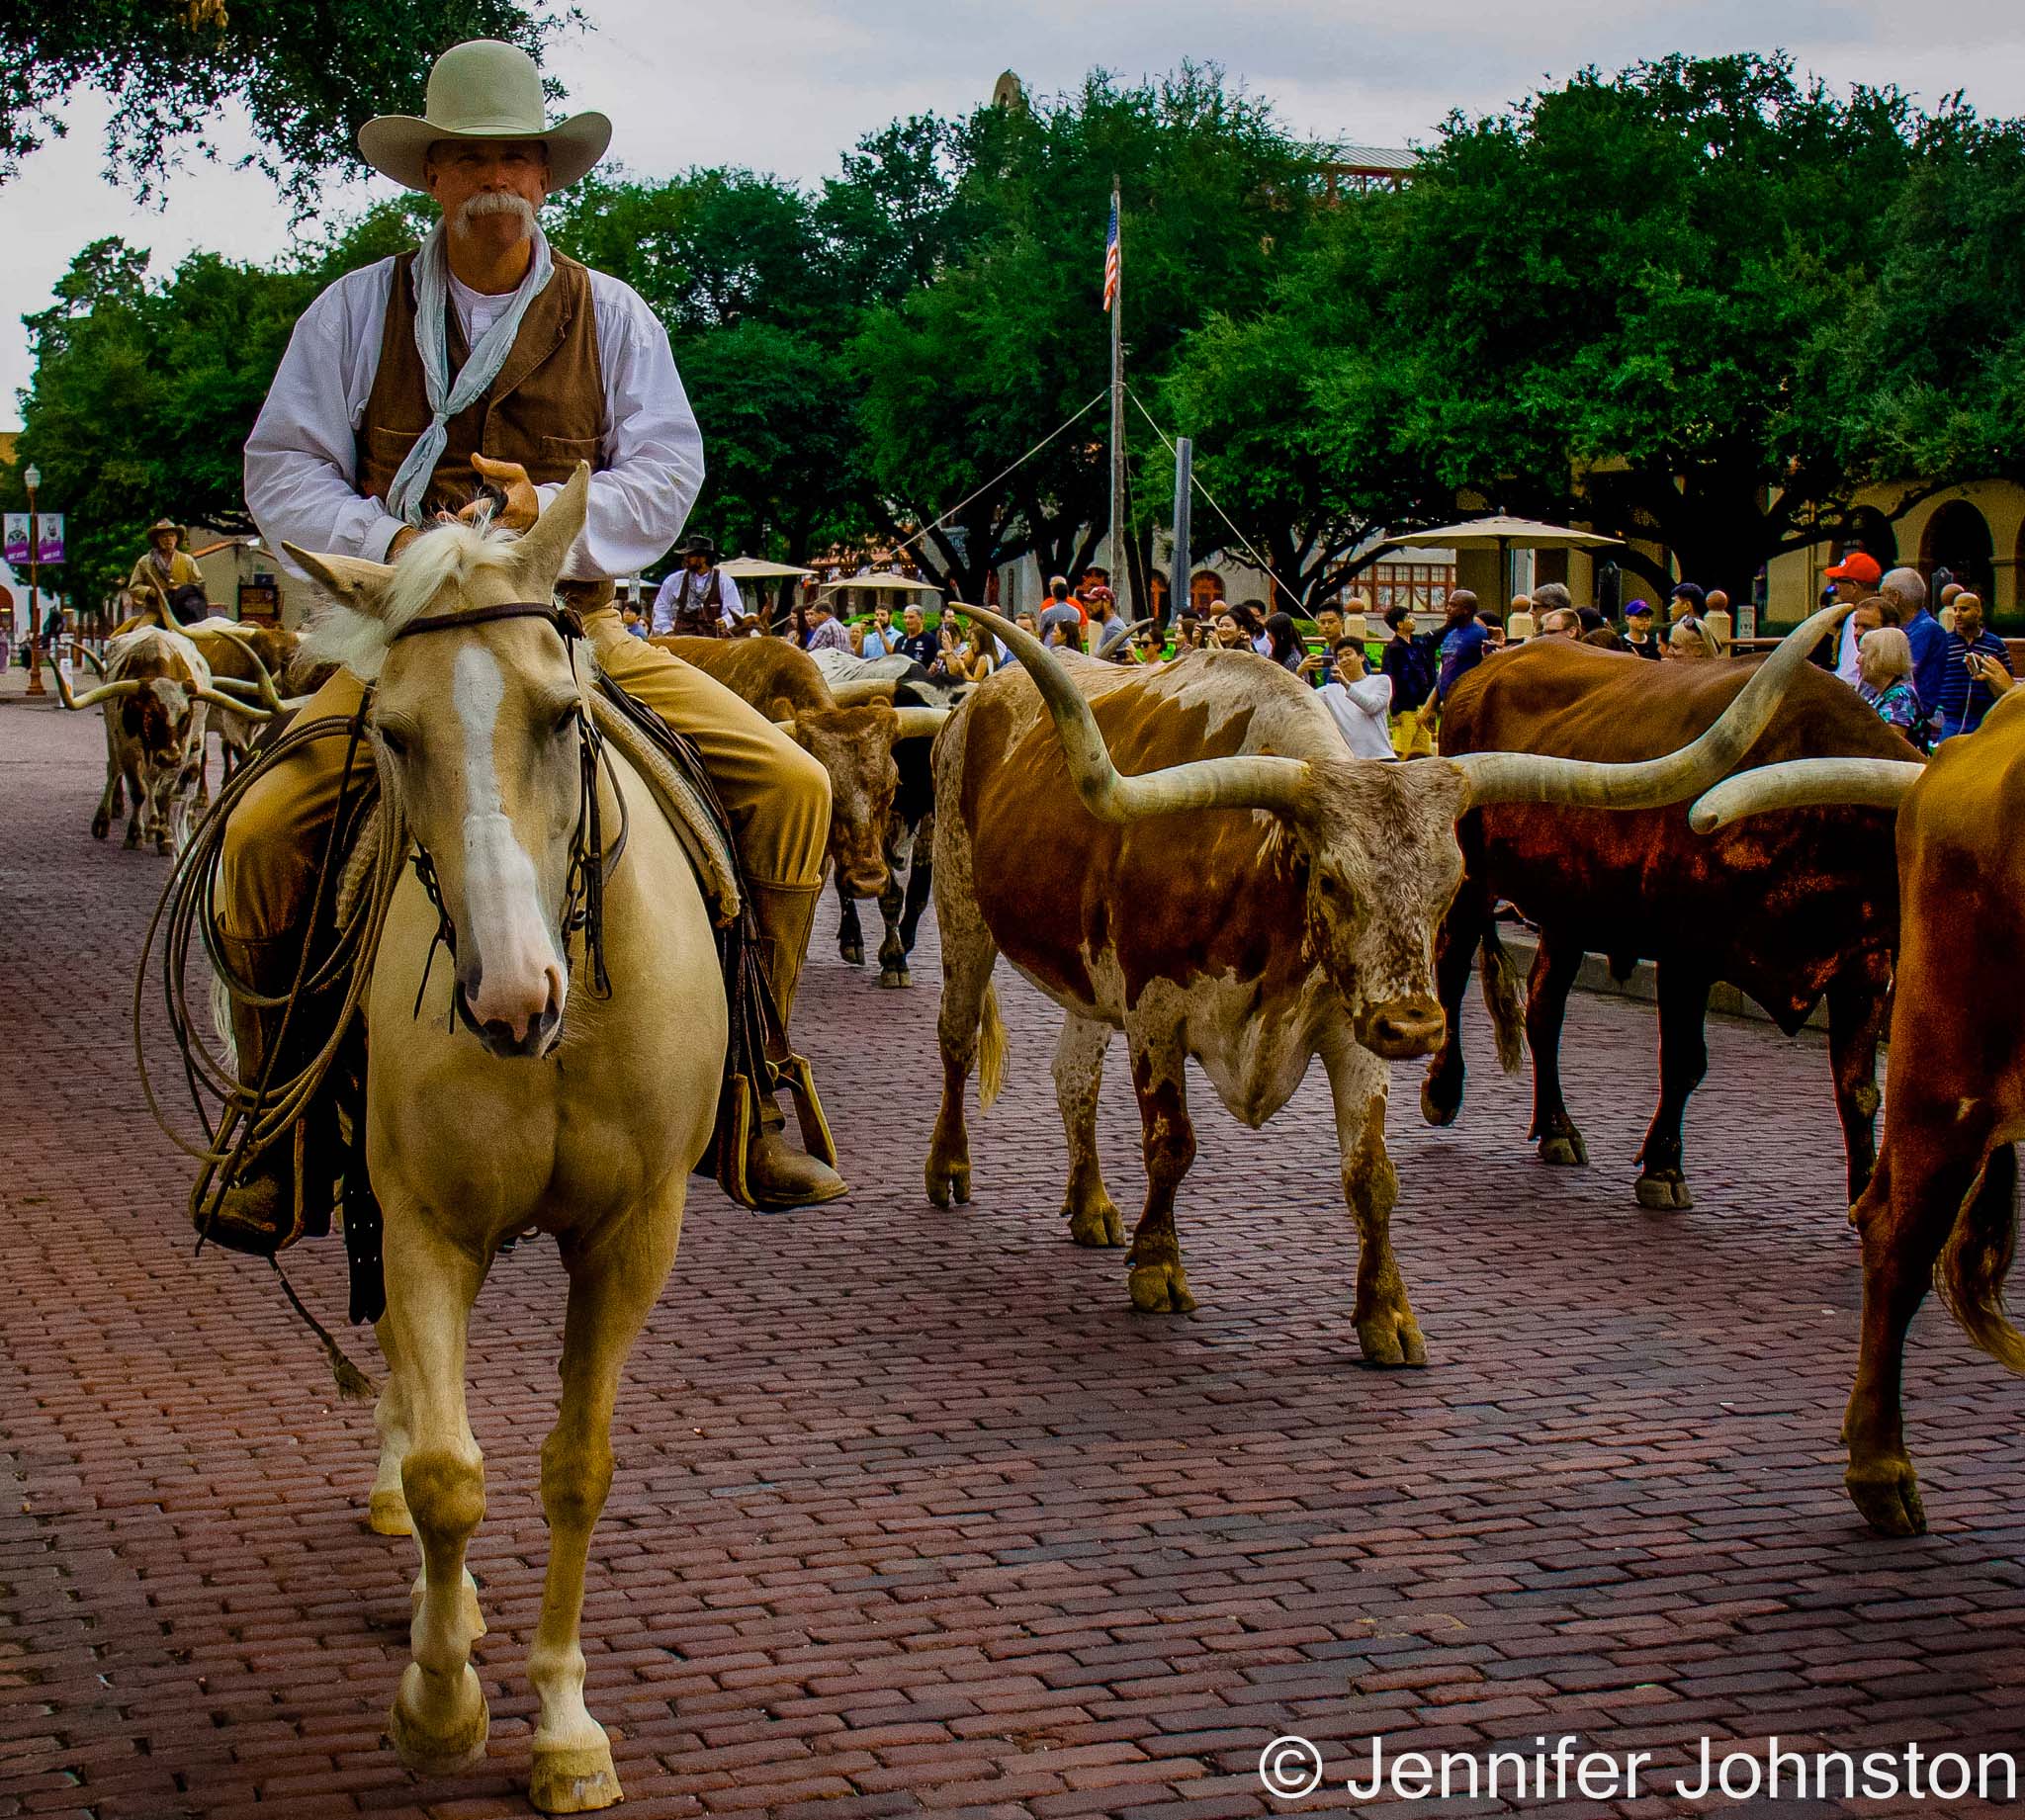 The Cowboy legacy lives on in Texas' Fort Worth's Stockyards District